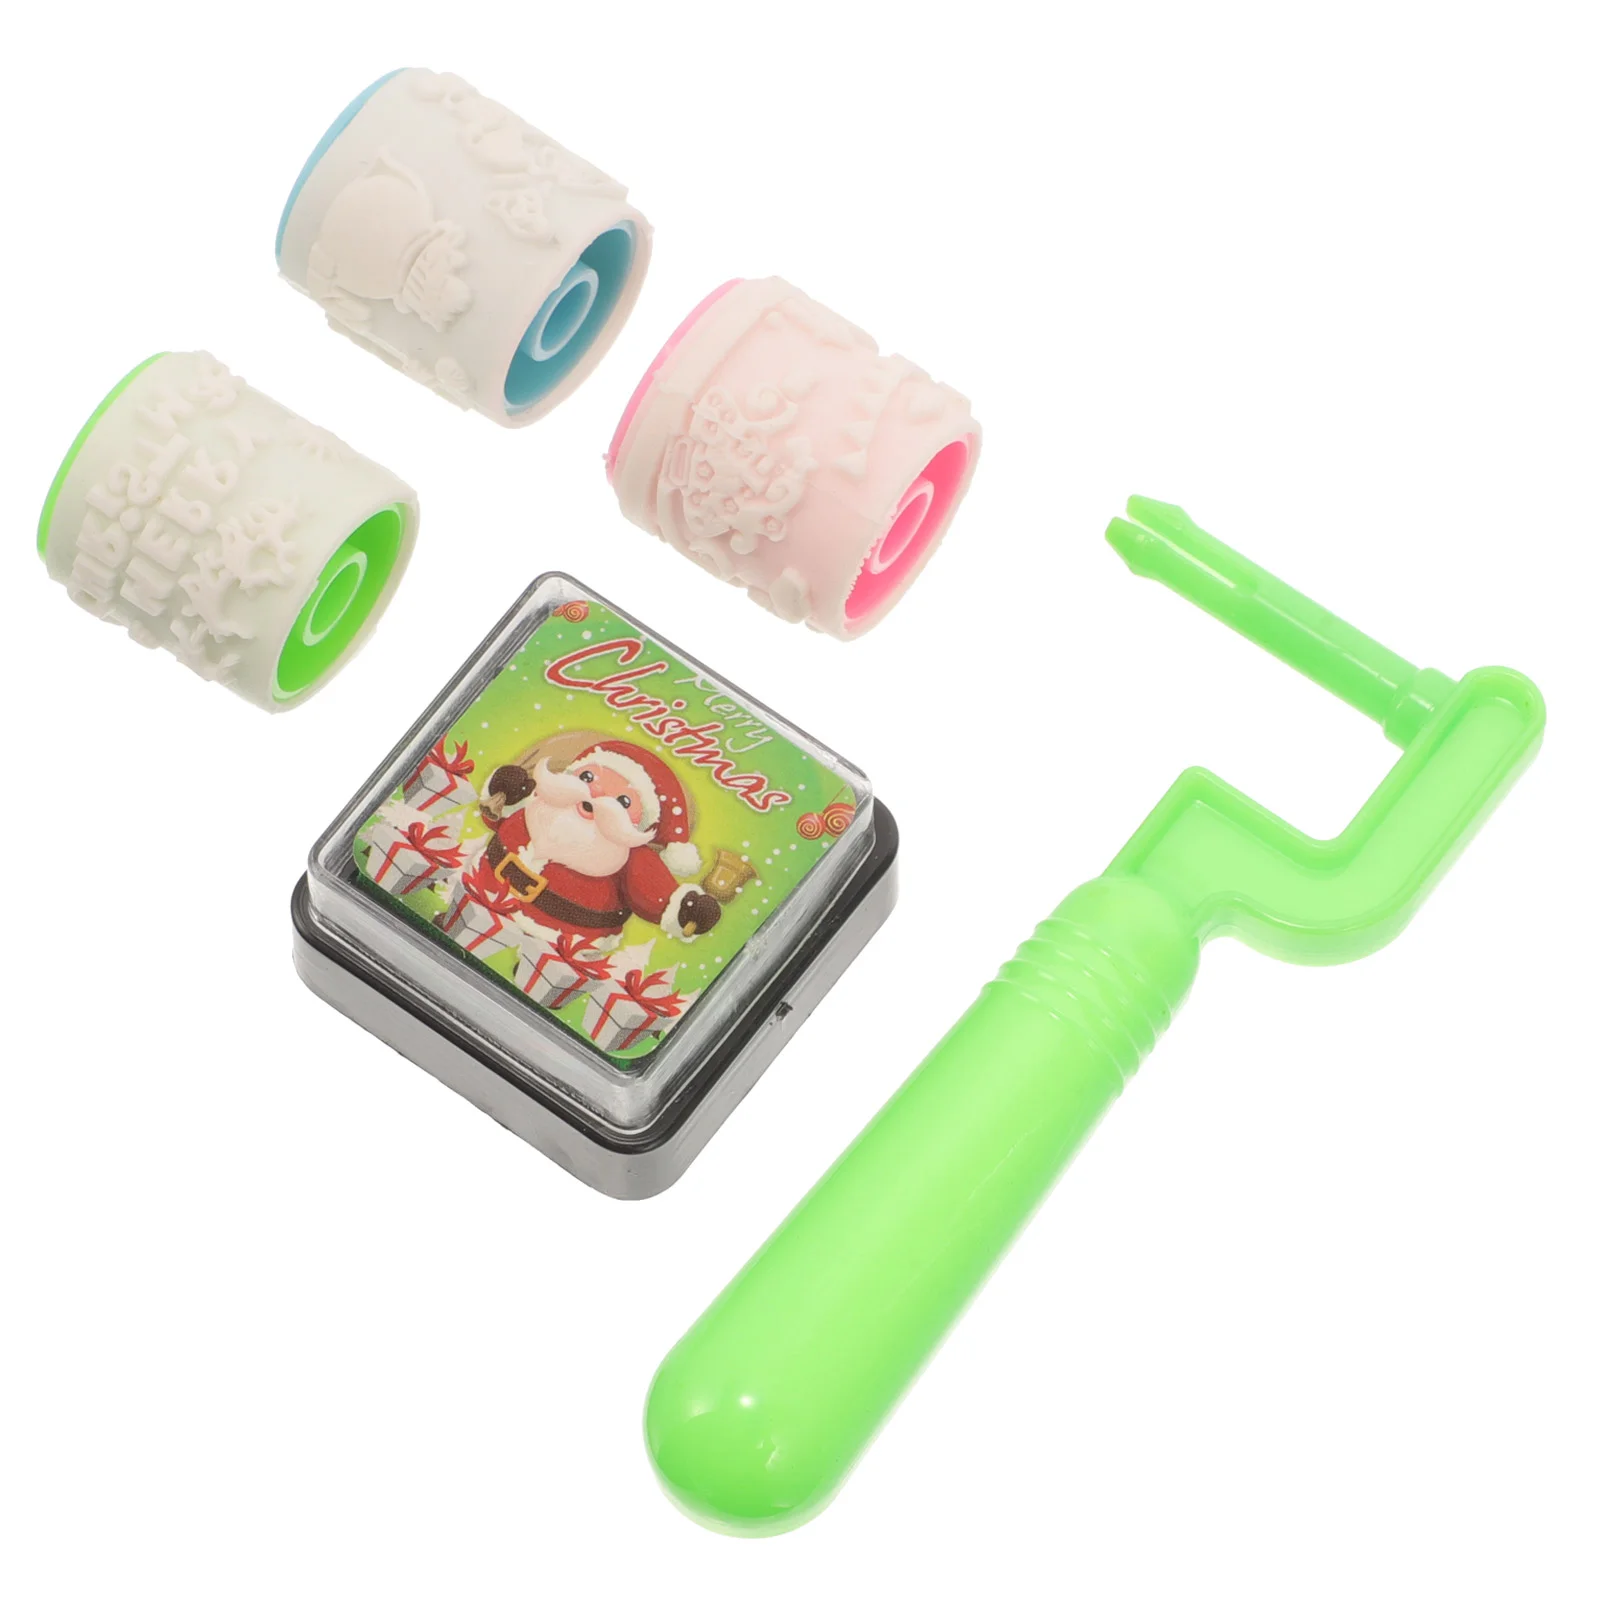 

Christmas Stamps Rollers Set Cute Nutcracker Kids Self-Ink Stampers Diy Card Christmas Party Favors Stocking Stuffers Kids